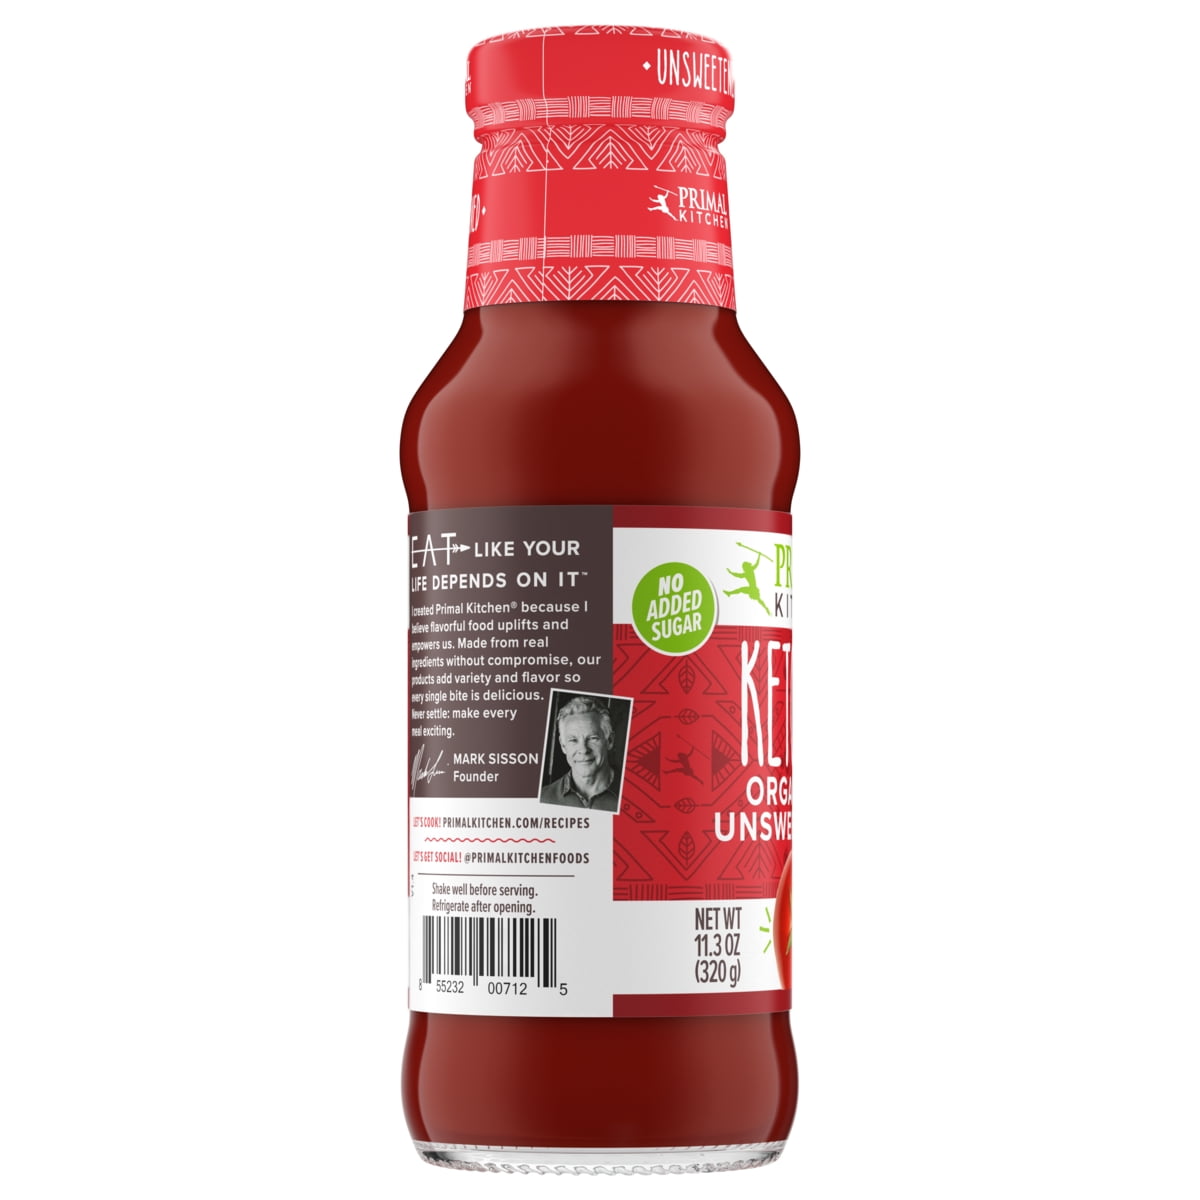 Primal Kitchen Spicy Ketchup Organic and Unsweetened 11.3 oz, 11.3 Ounce